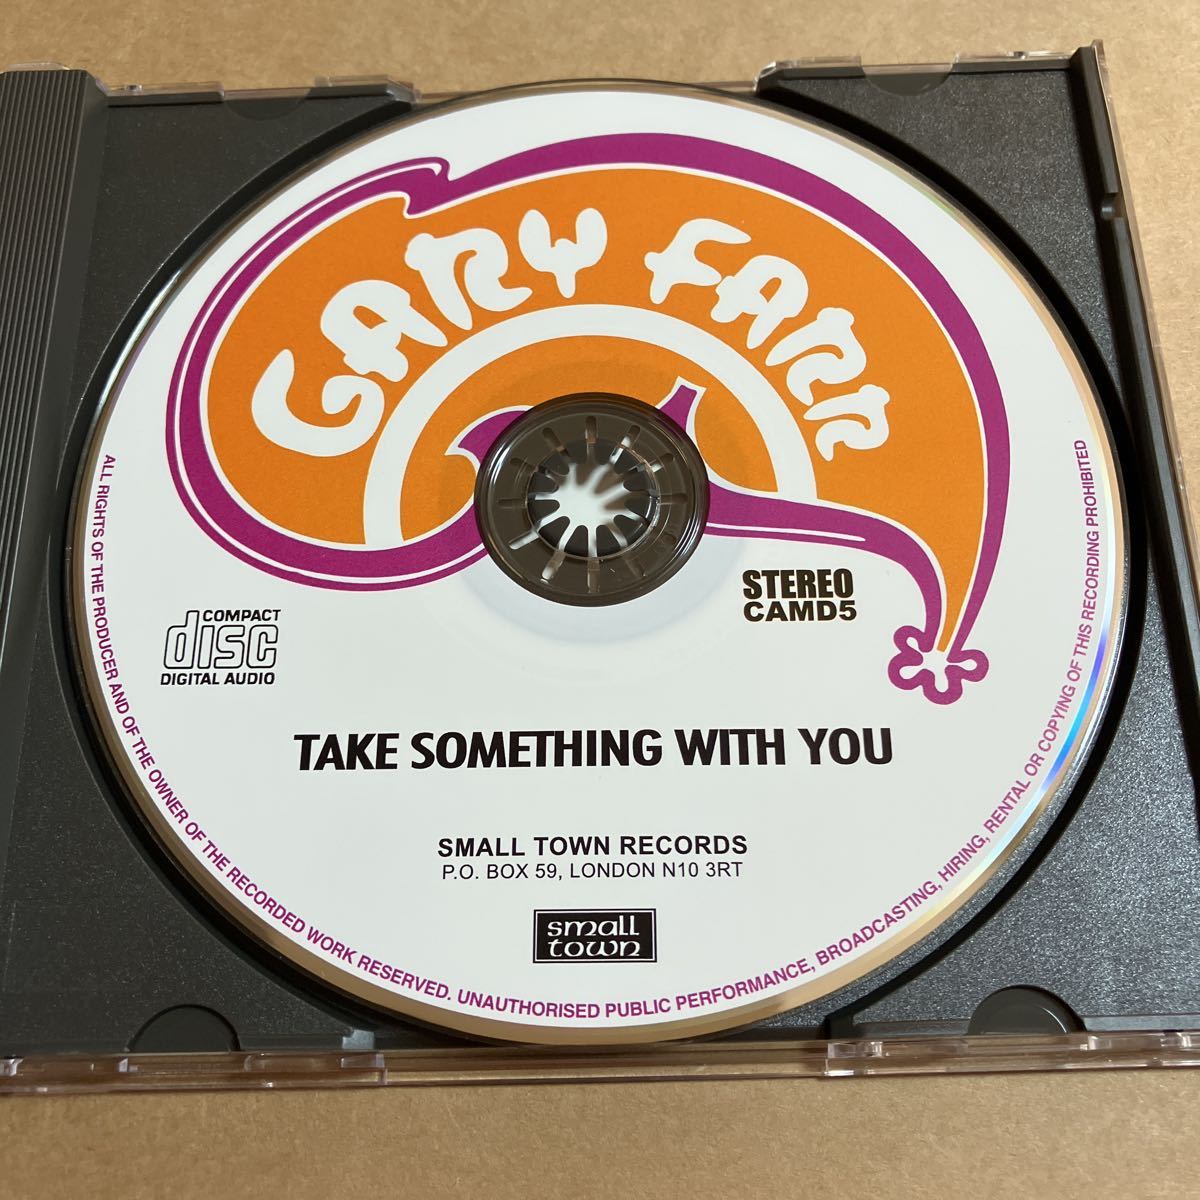 CD GARY FARR / TAKE SOMETHING WITH YOU CAMD5 ゲイリー・ファー_画像3